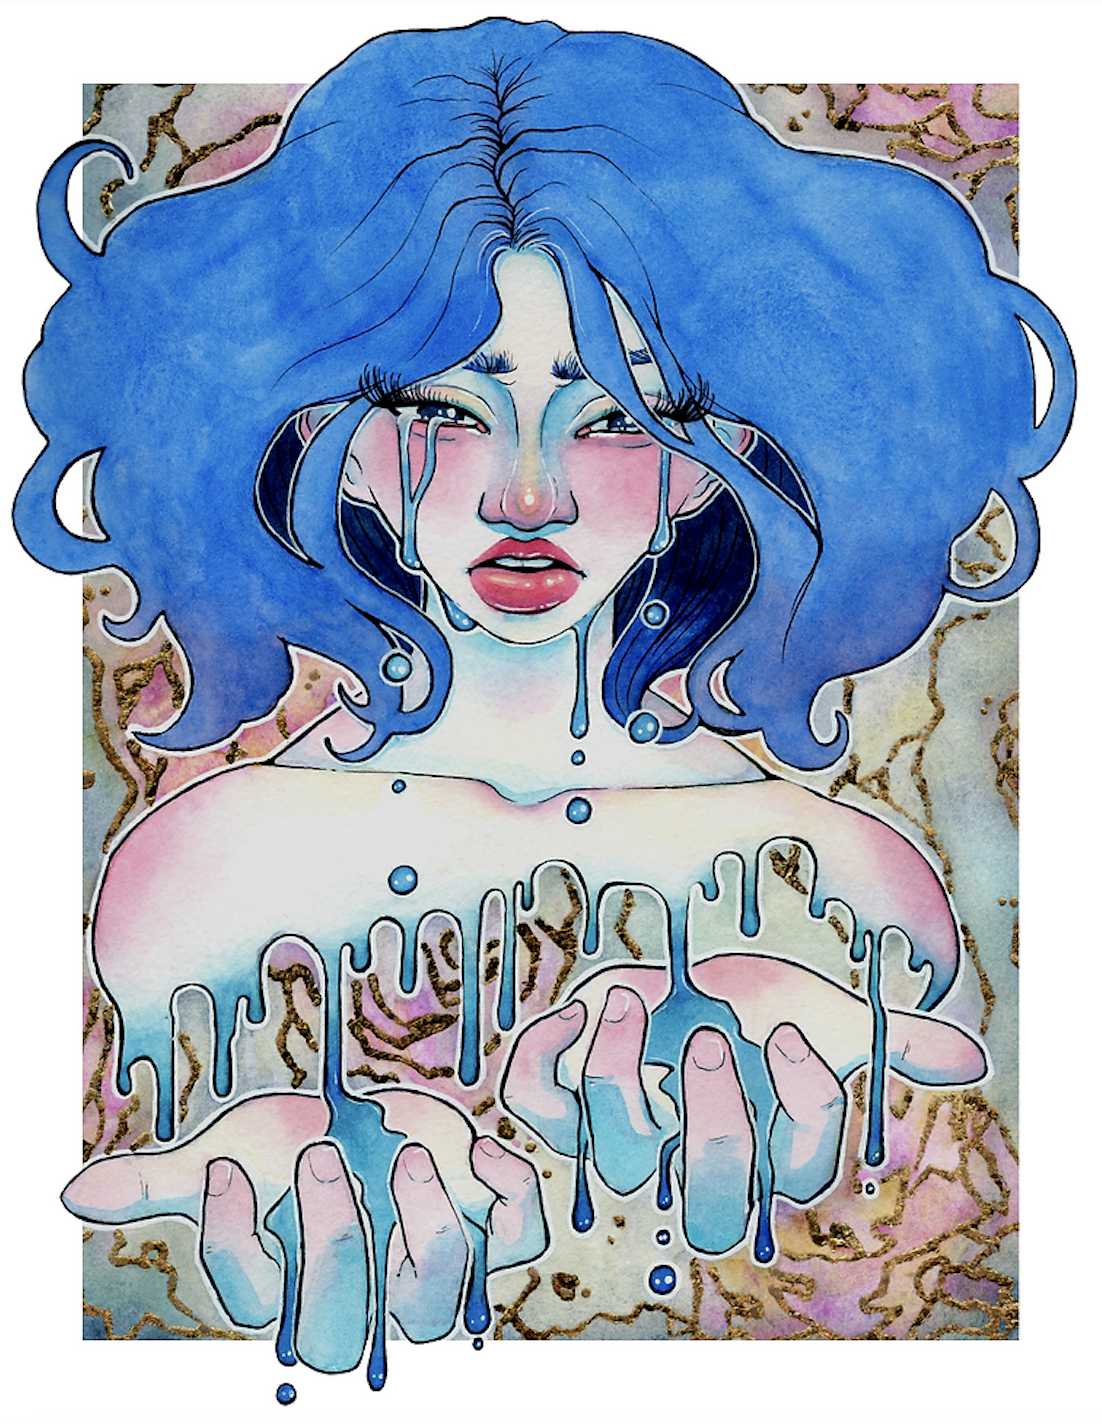 Watercolor portrait of a woman with blue hair crying